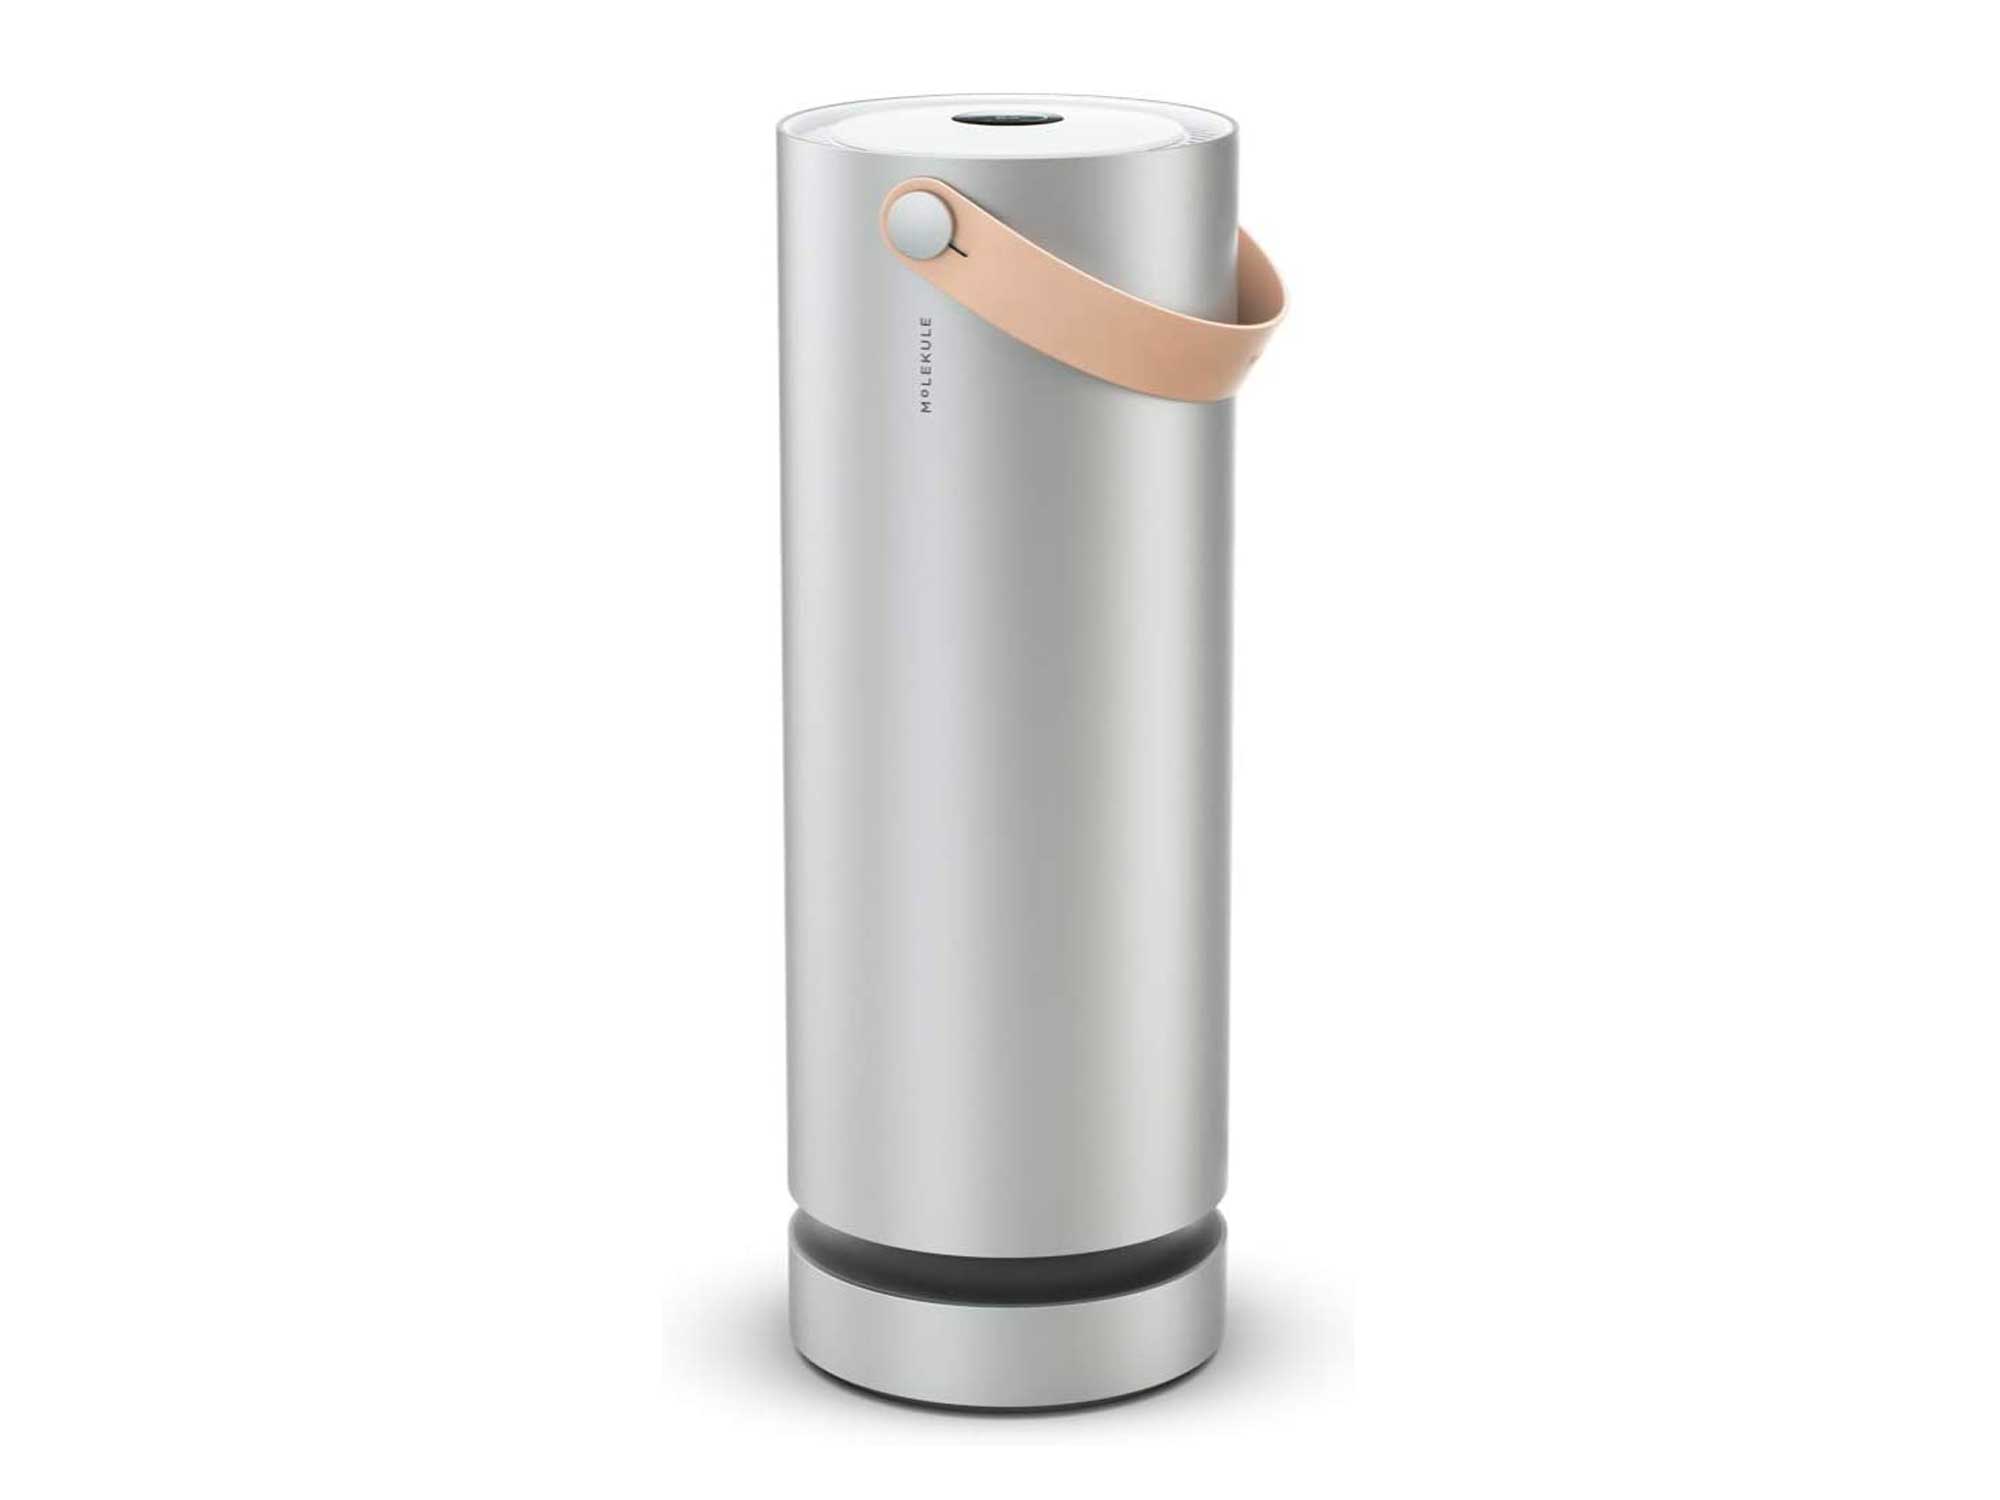 Molekule Air Large Room Air Purifier with PECO Technology for Allergens, Pollutants, Viruses, Bacteria, and Mold, Silver